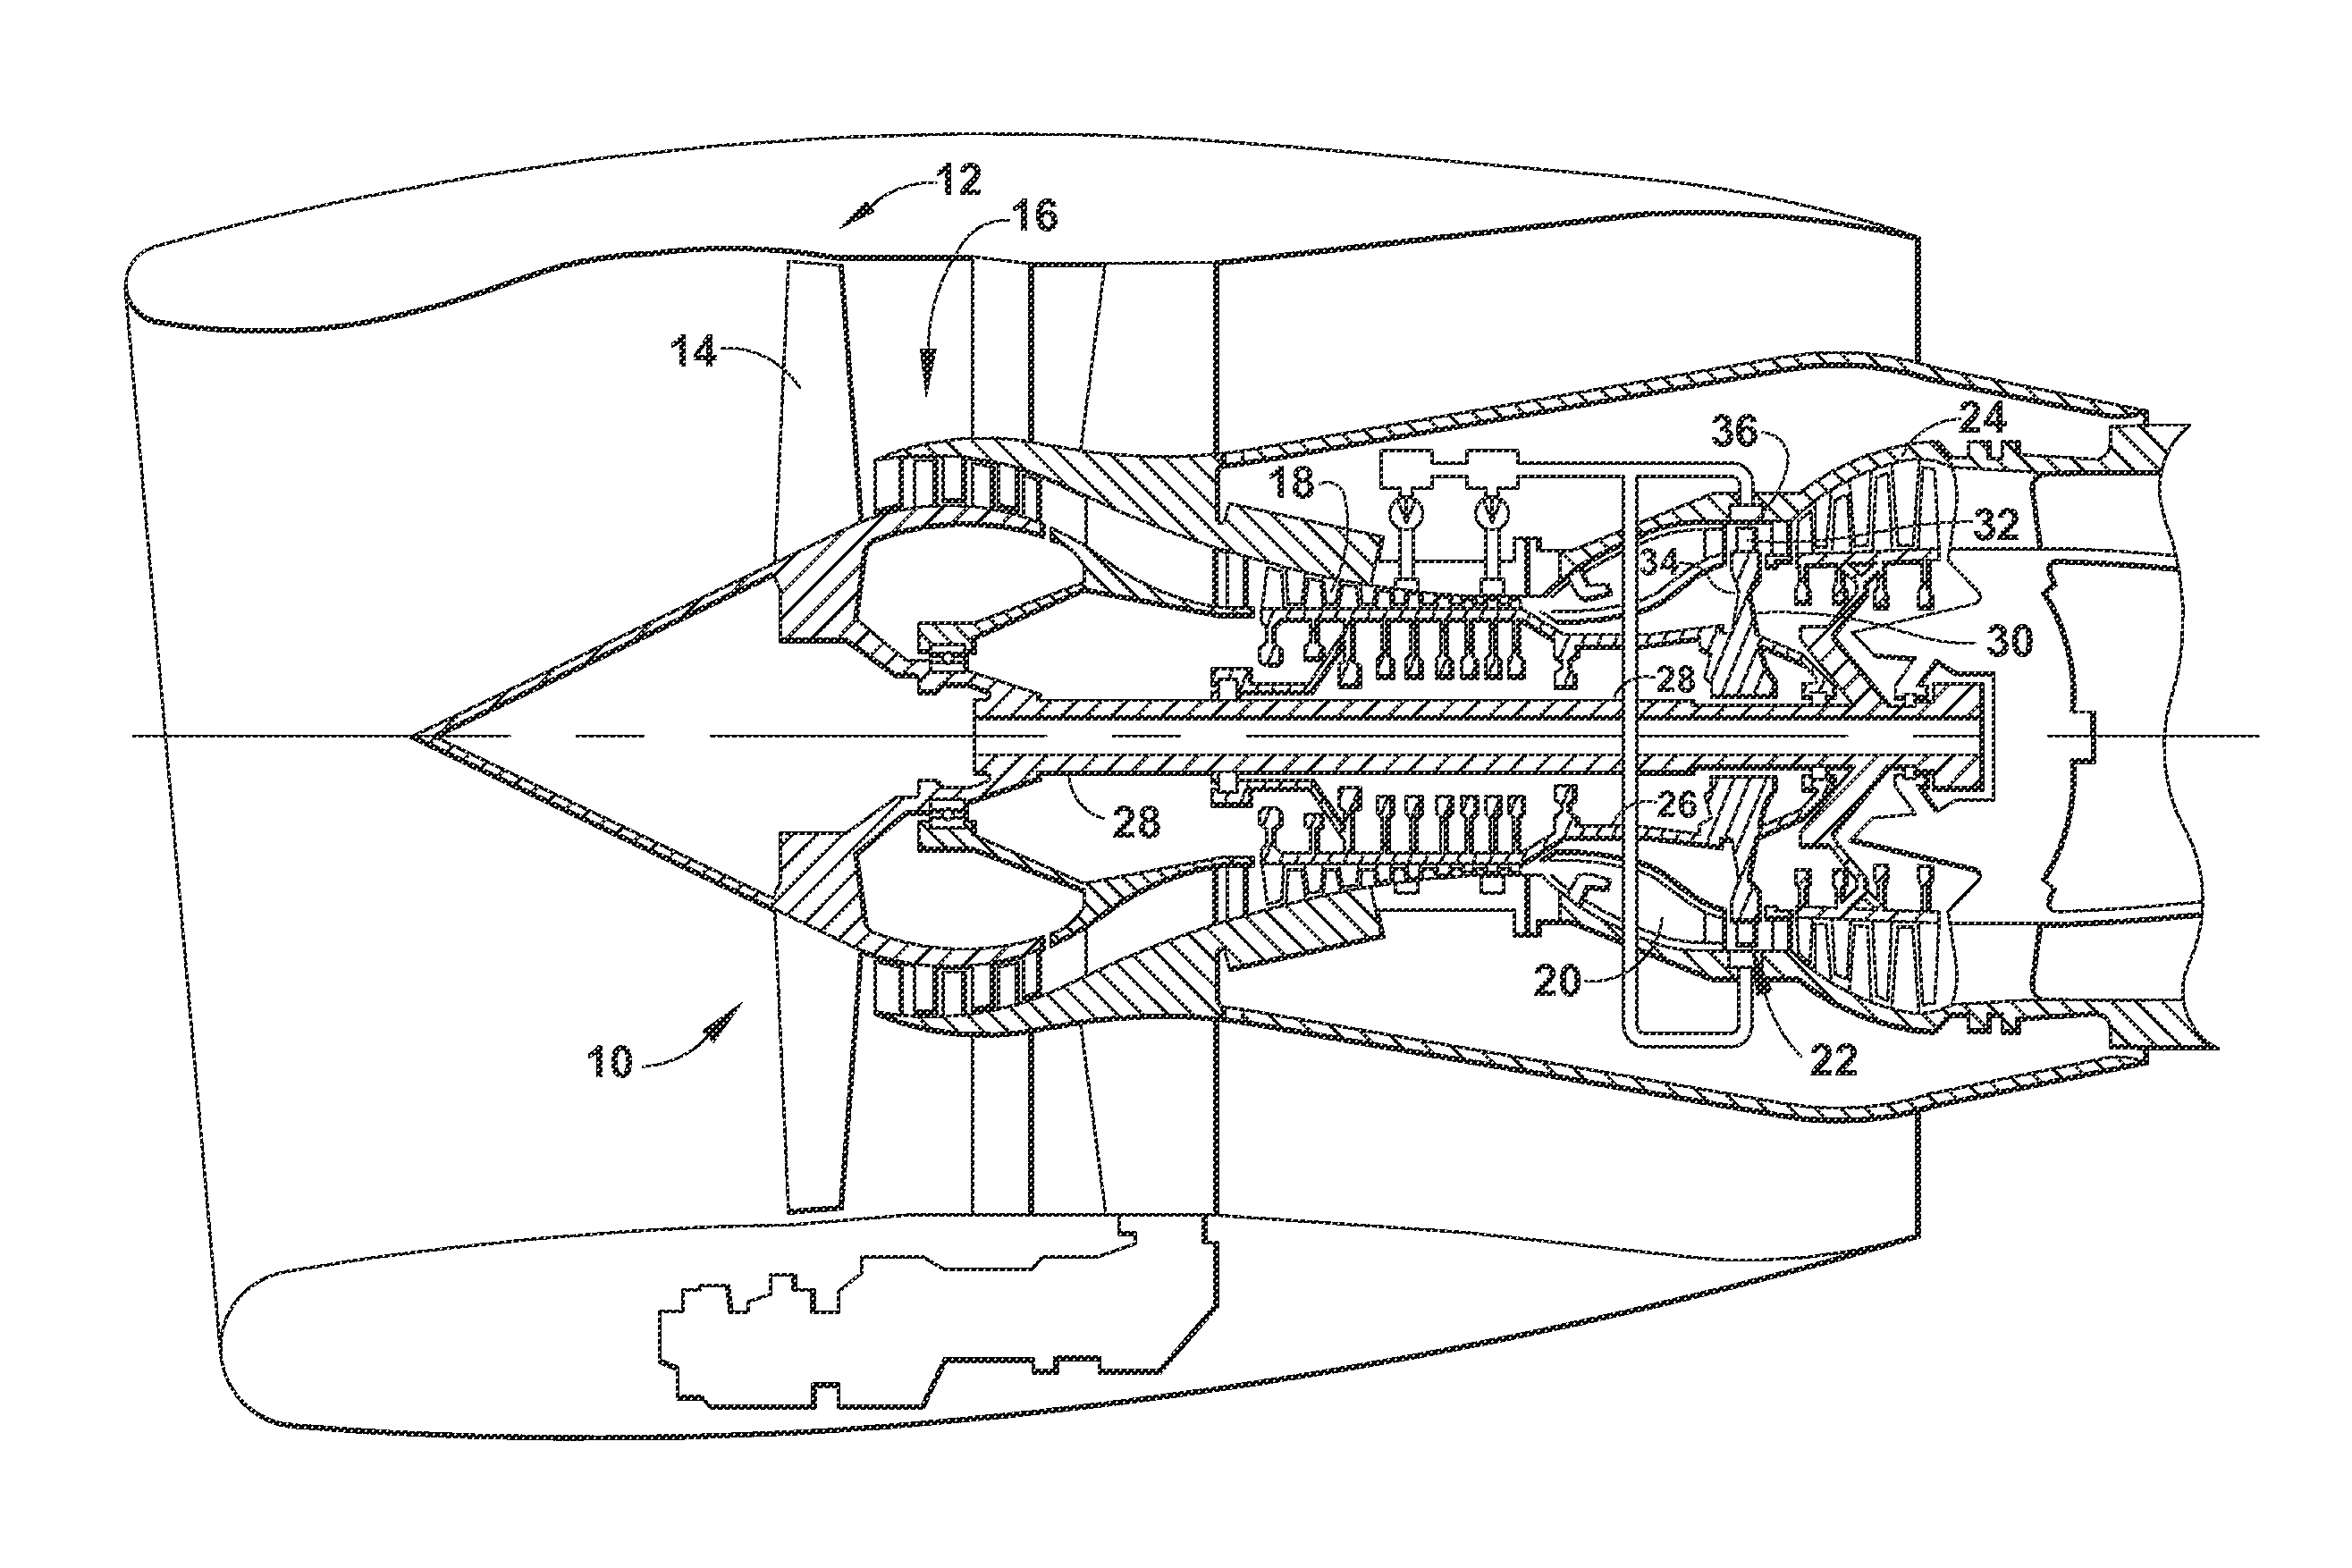 Apparatus for generating power from a turbine engine